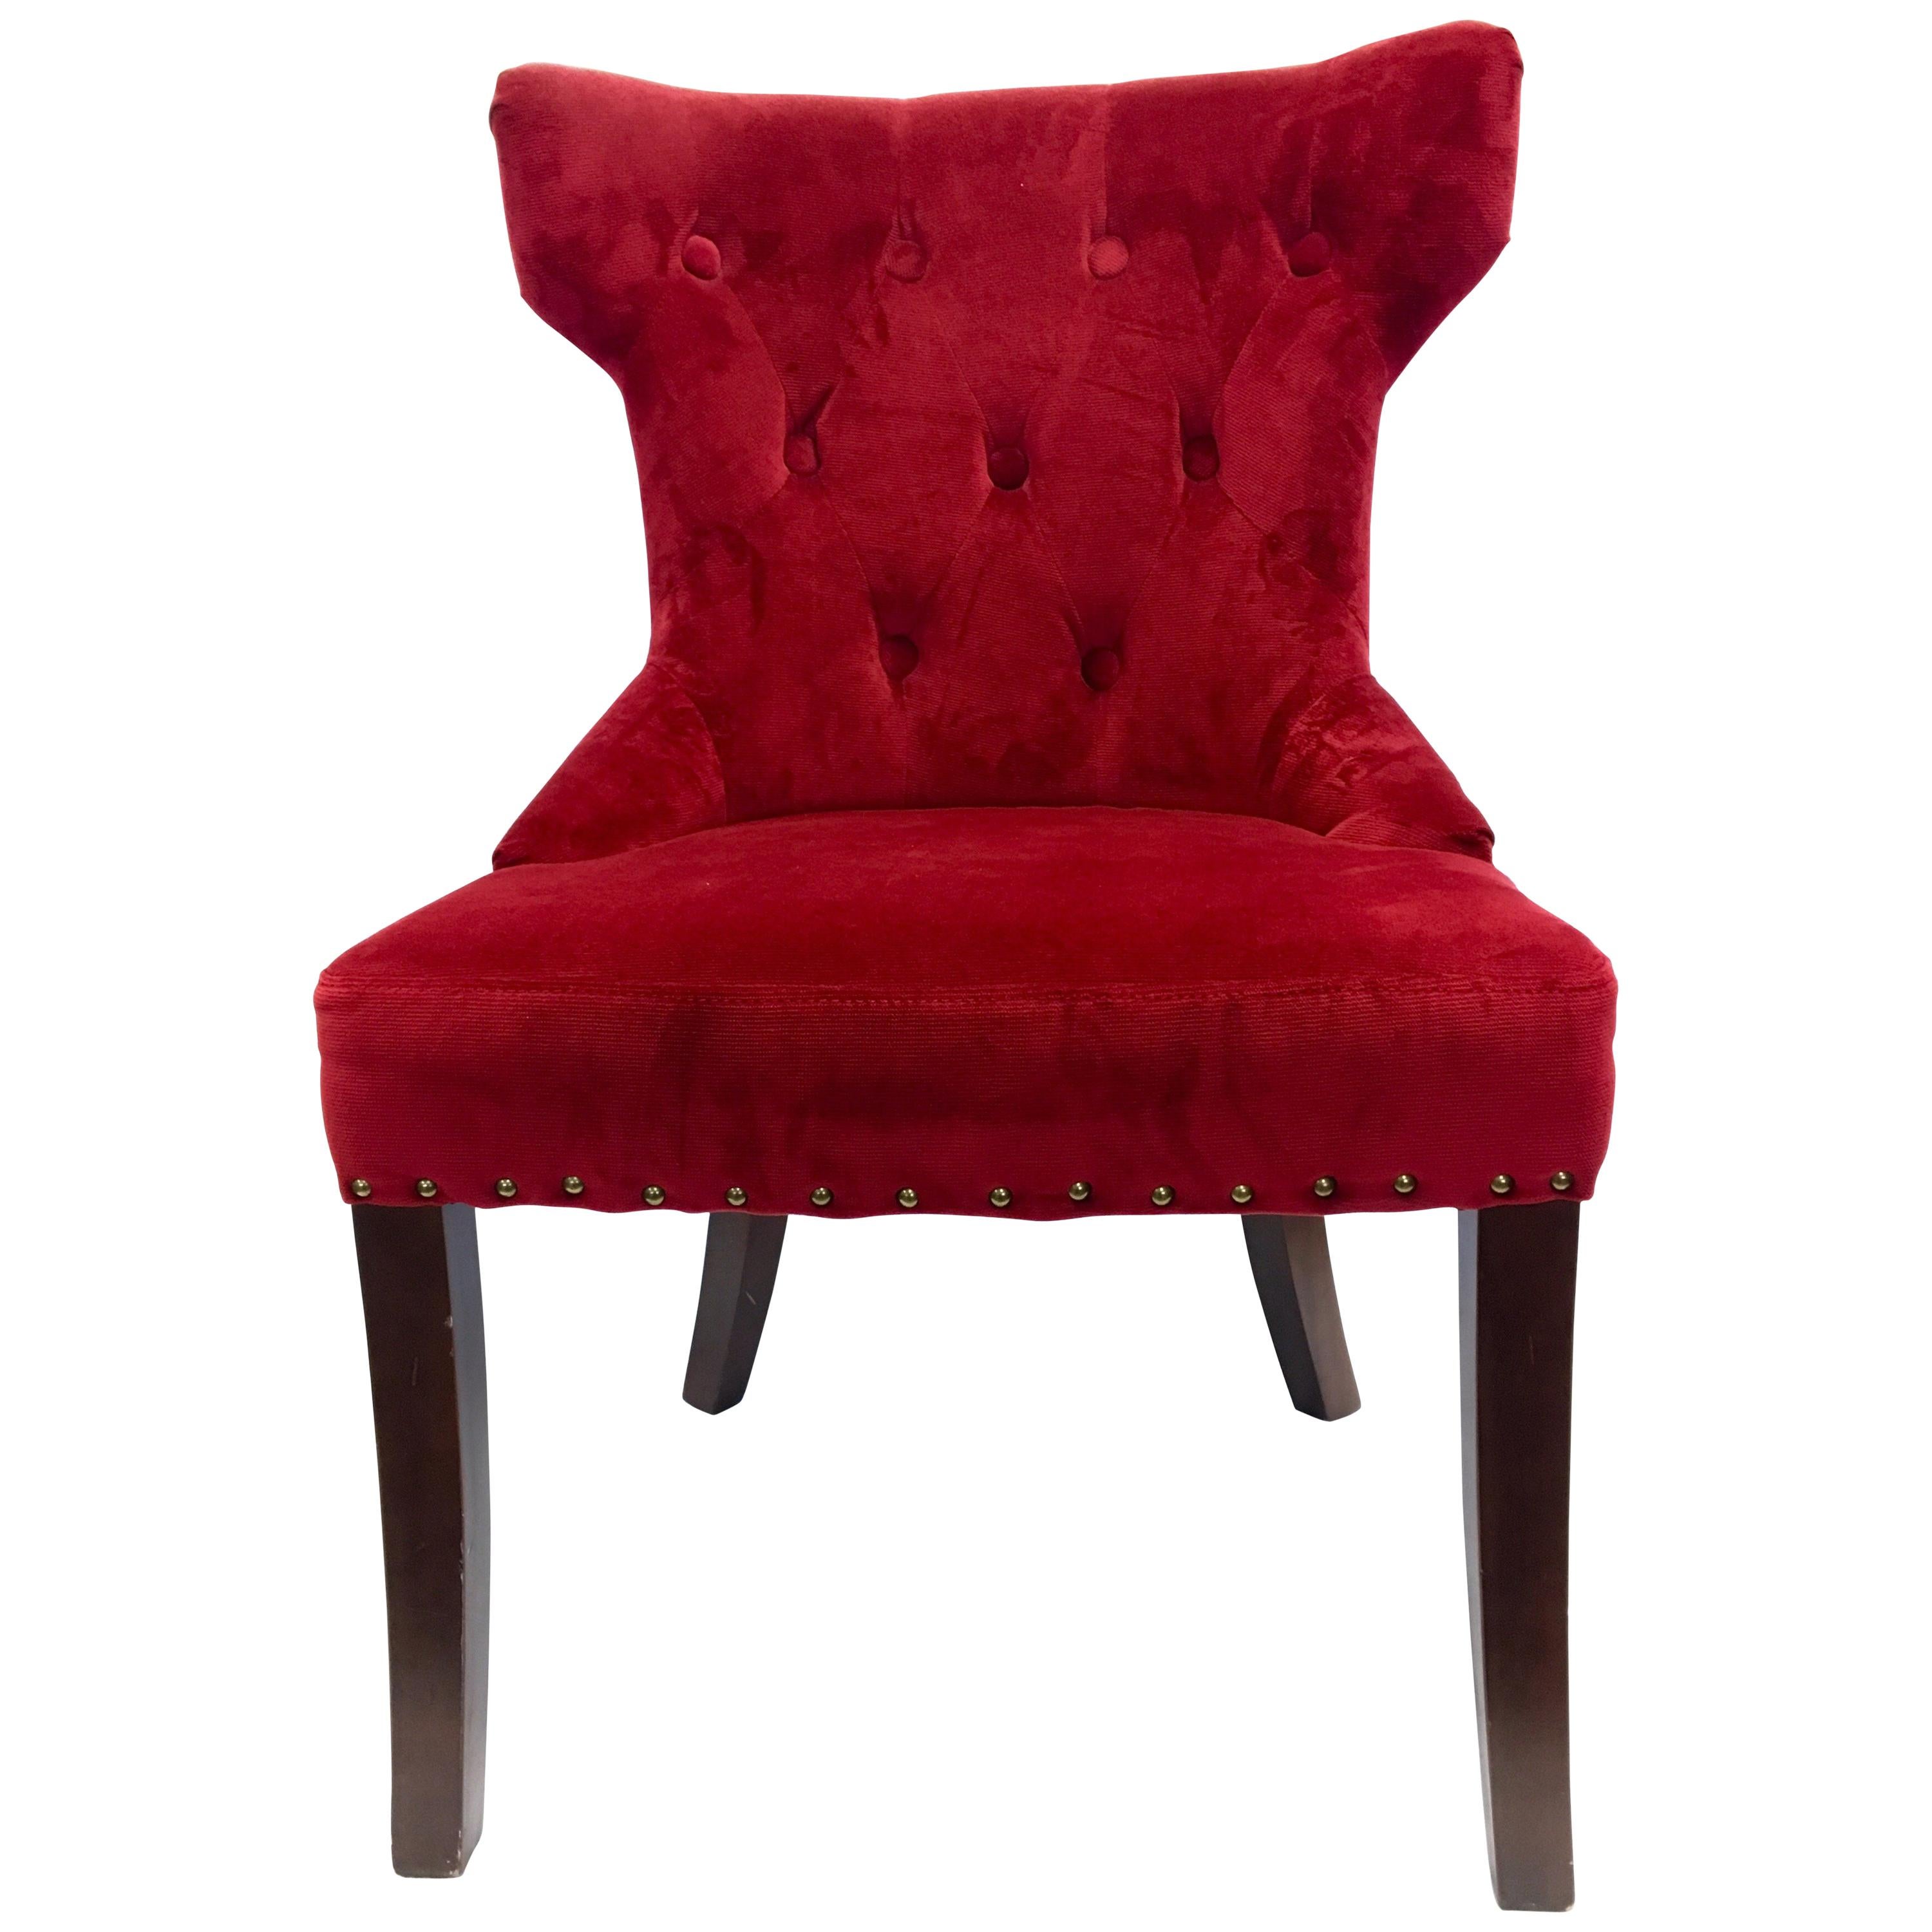 Set of Three Custom Upholstered Nailhead Red Tufted Dining Chairs